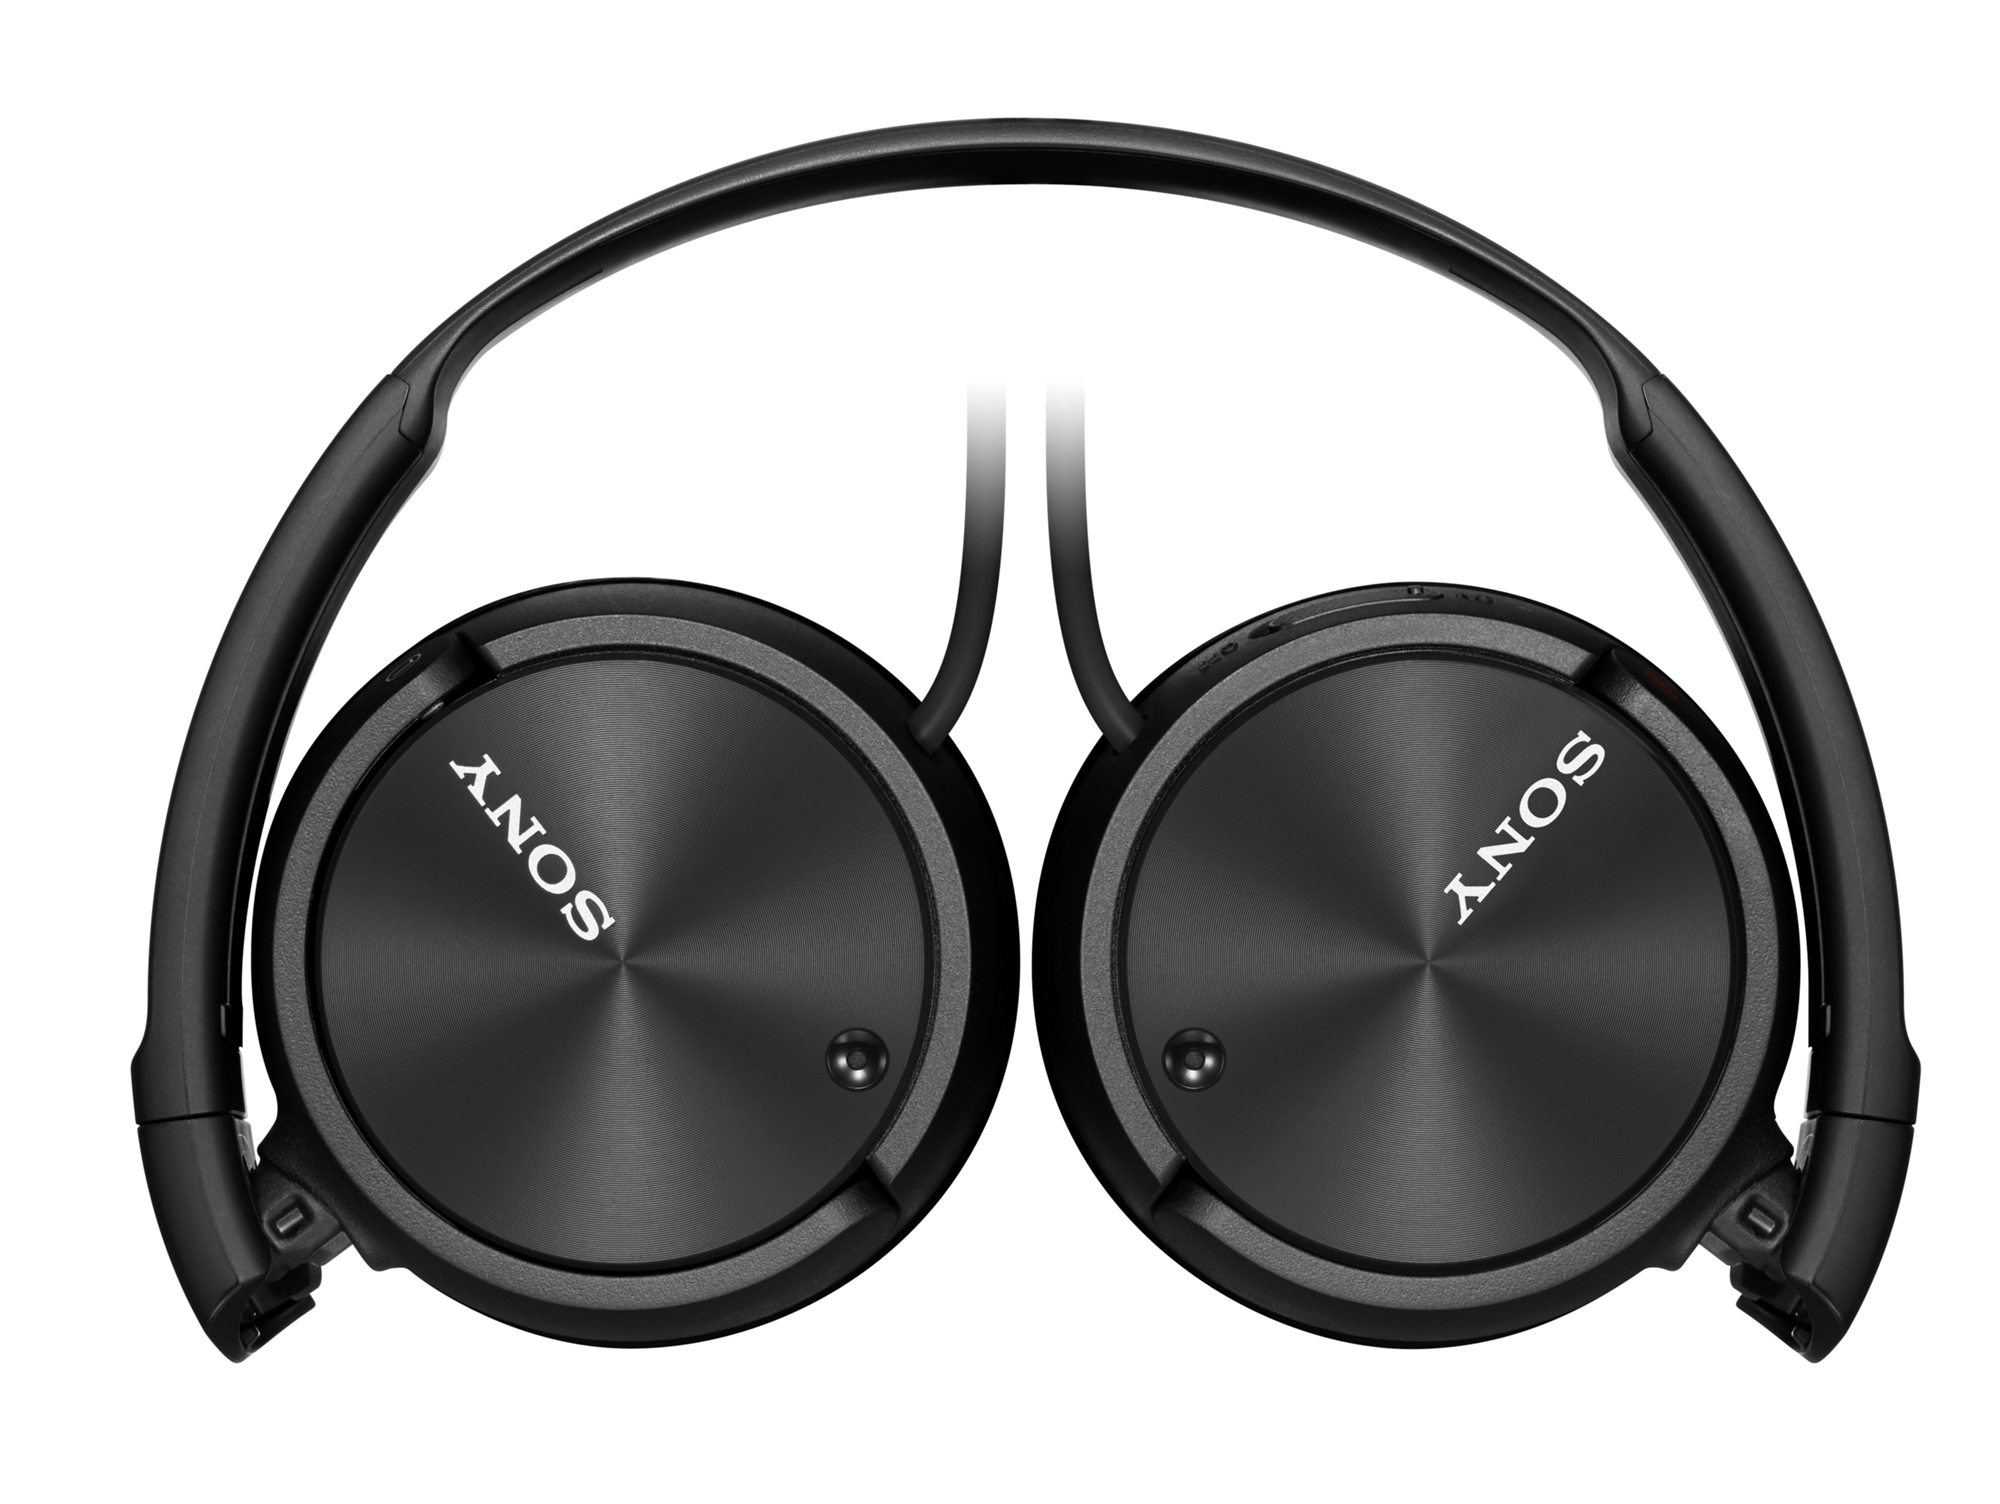 SONY MDR-AS210 Black / Auriculares deportivos InEar con cable